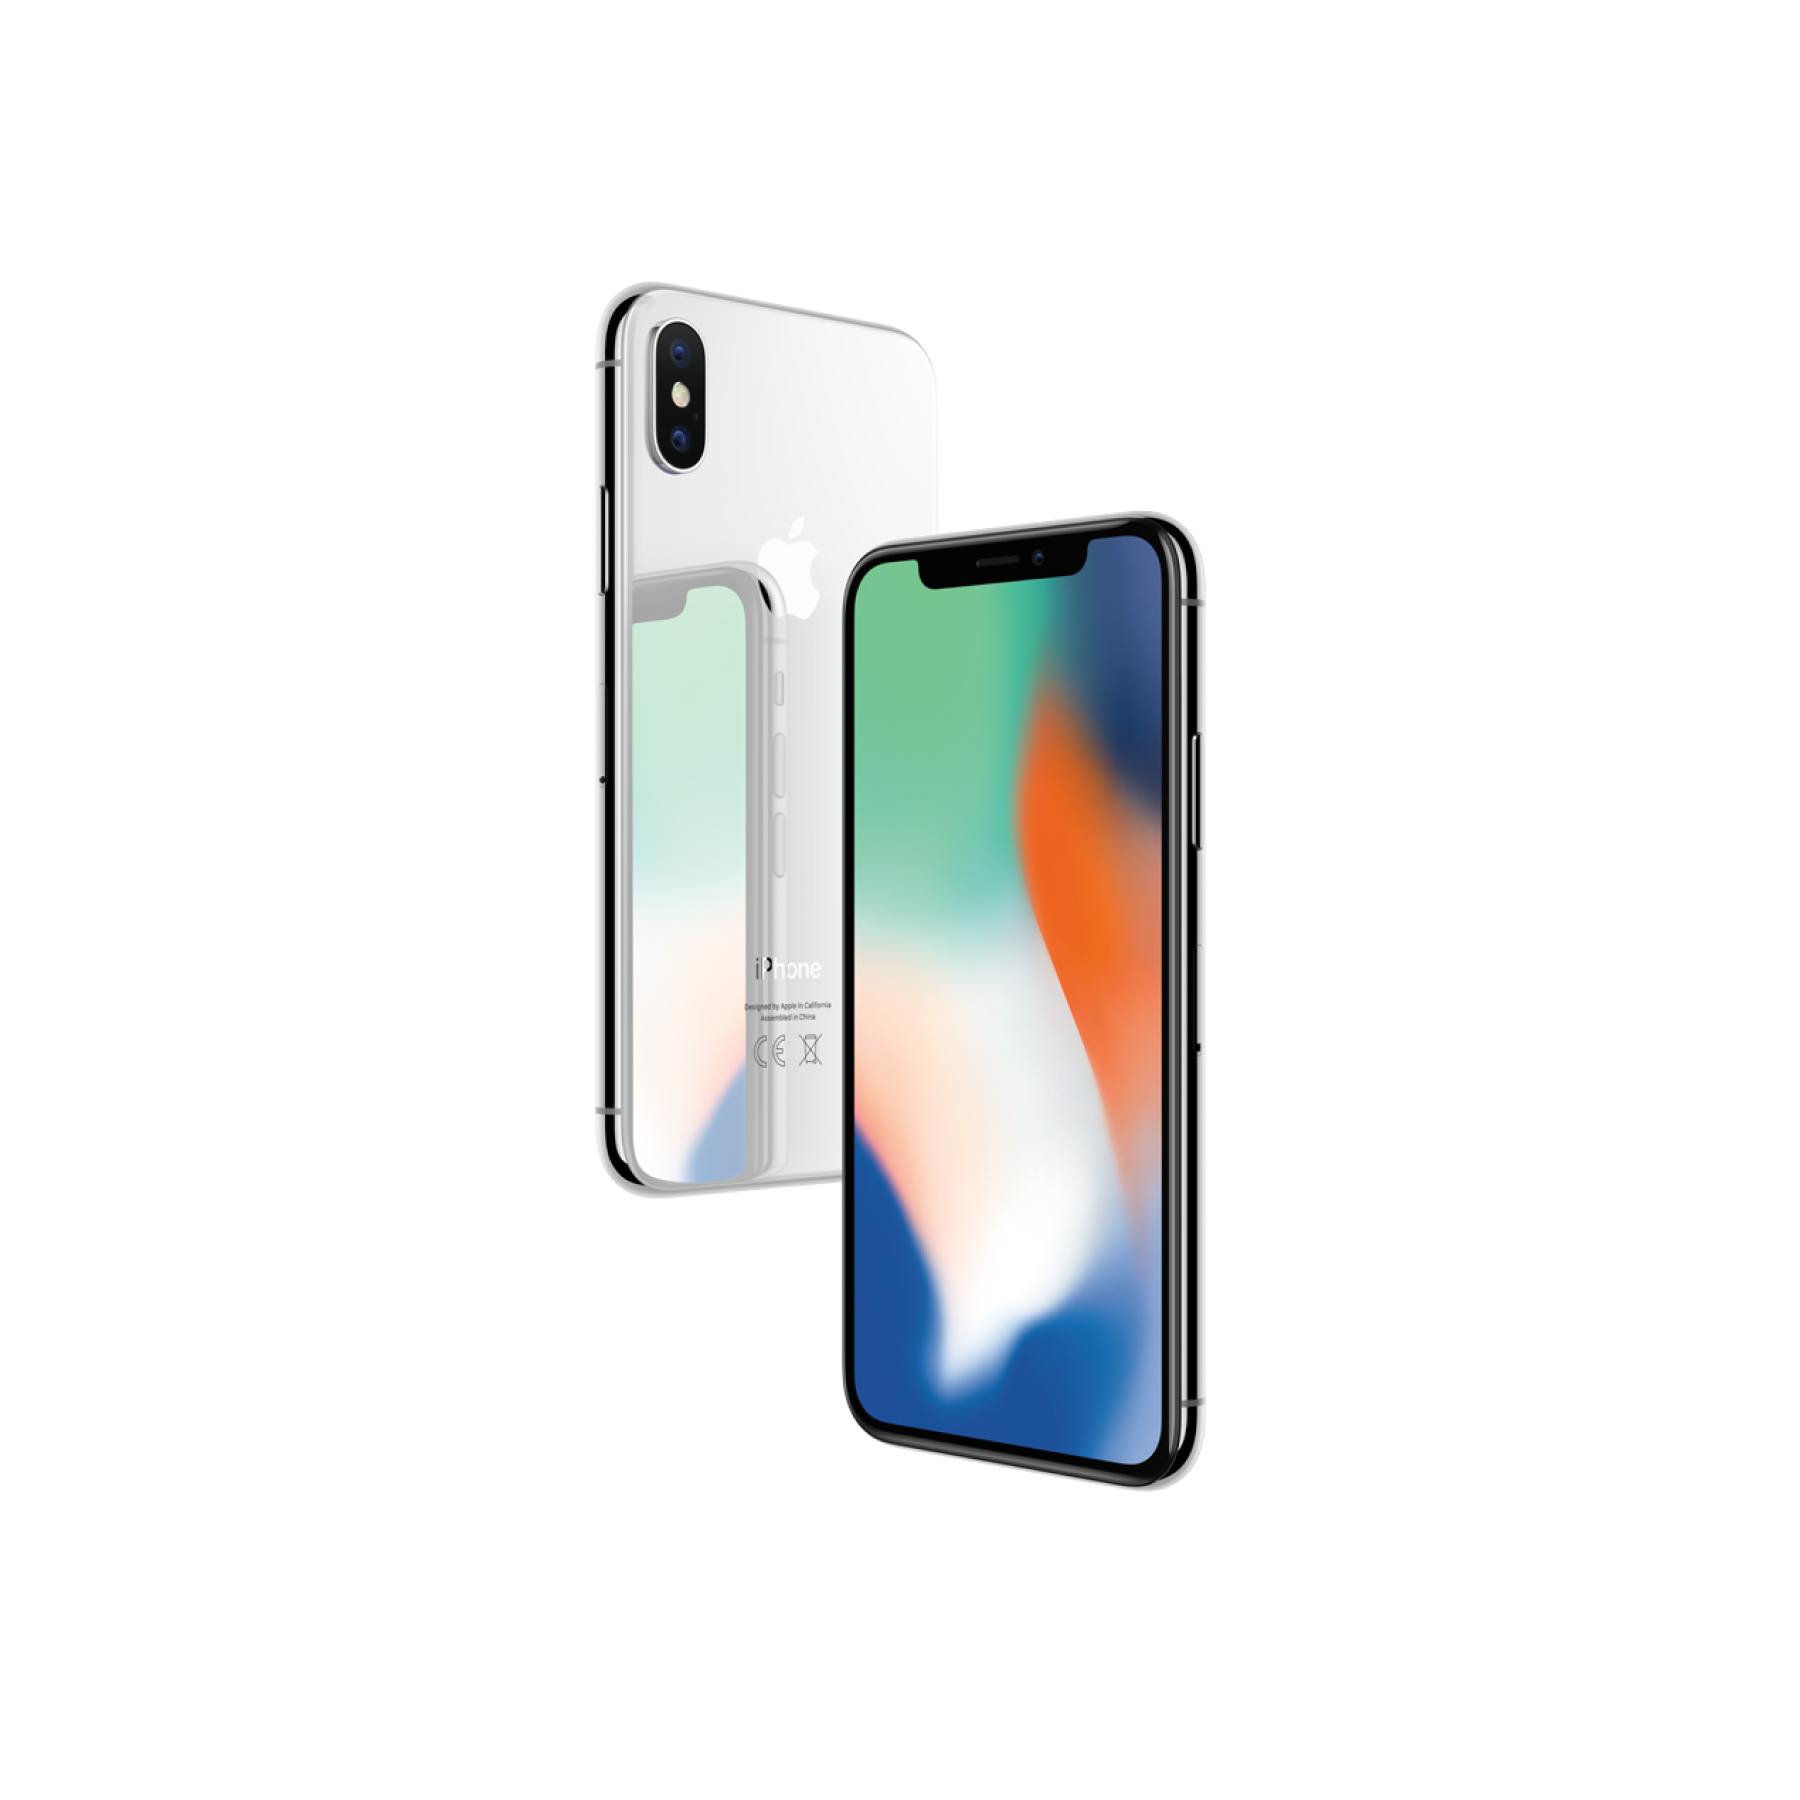 iPhone X 256GB Silver (Better)